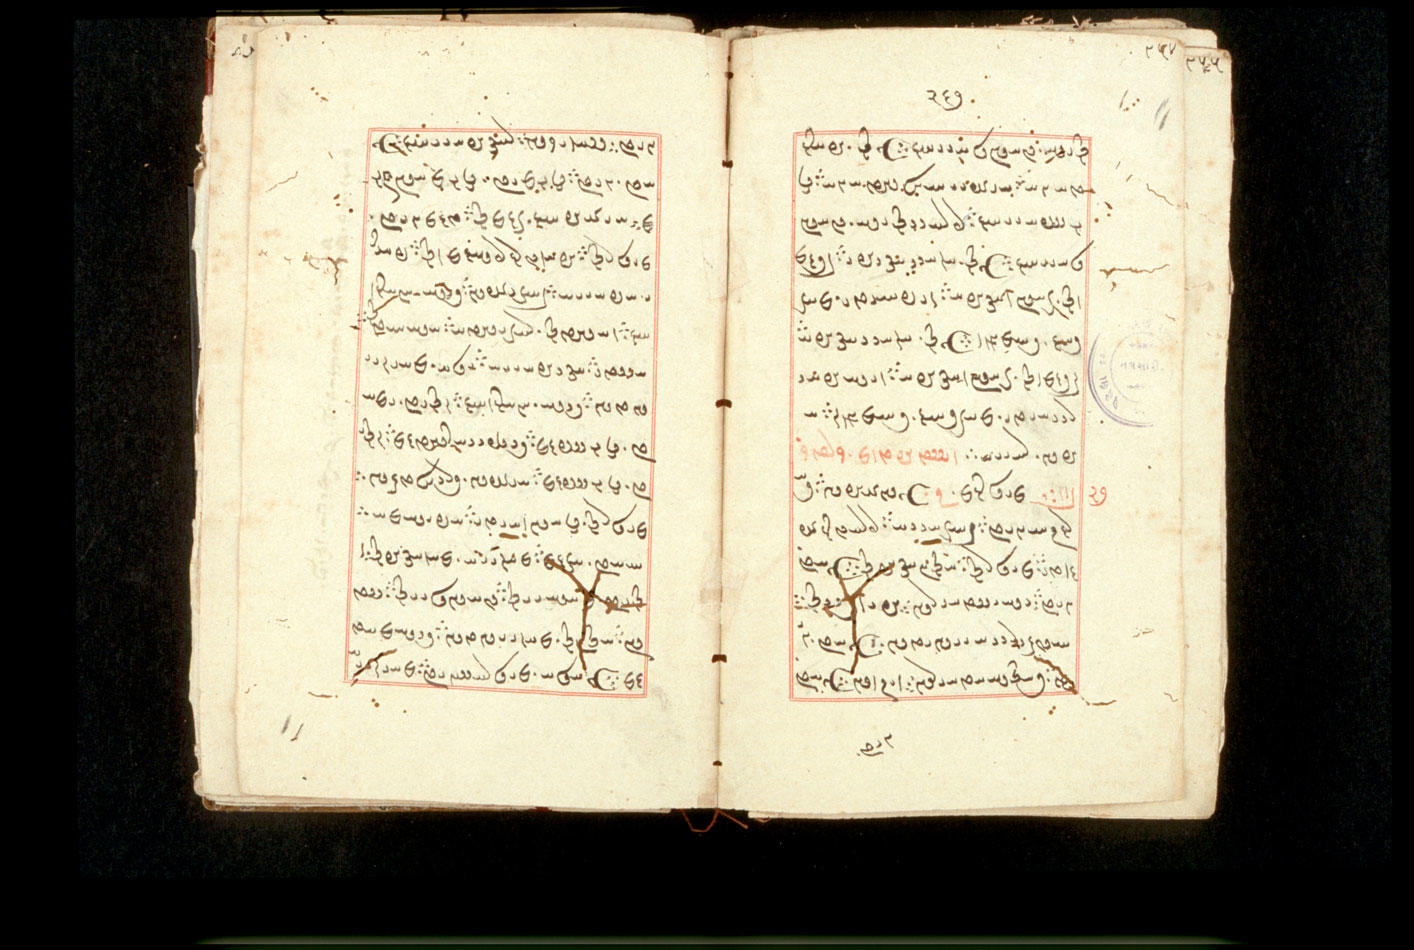 Folios 267v (right) and 268r (left)